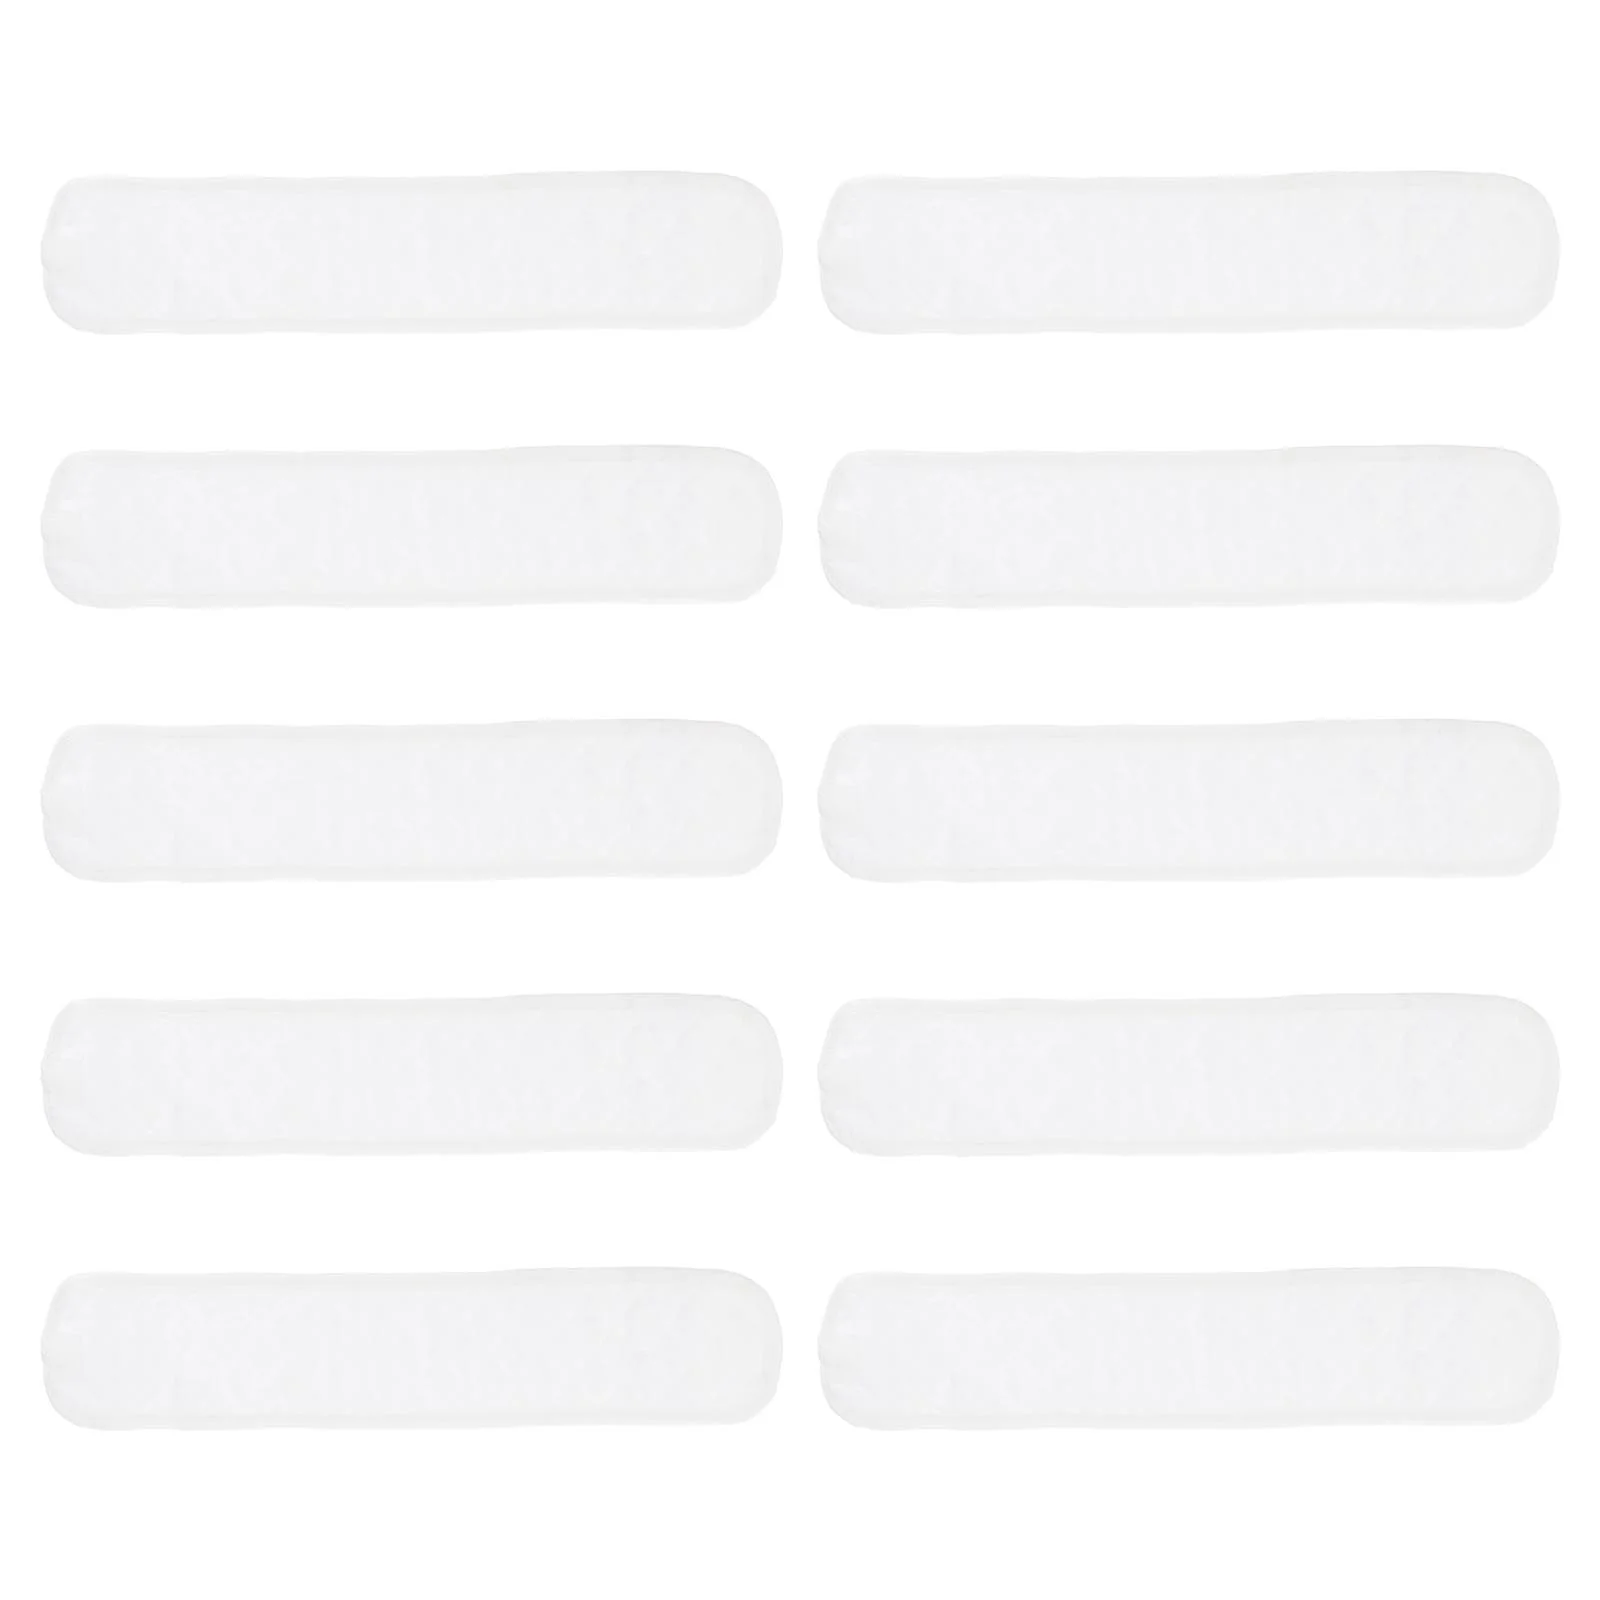 10Pcs infant navel belt Belly Band Cotton Umbilical Bands White Breathable Newborn Infant newborn belly band Bands infant belly 3pcs infant umbilical cord care belly navel belt belly protection baby newborn soft breathable white cotton umbilical cord care